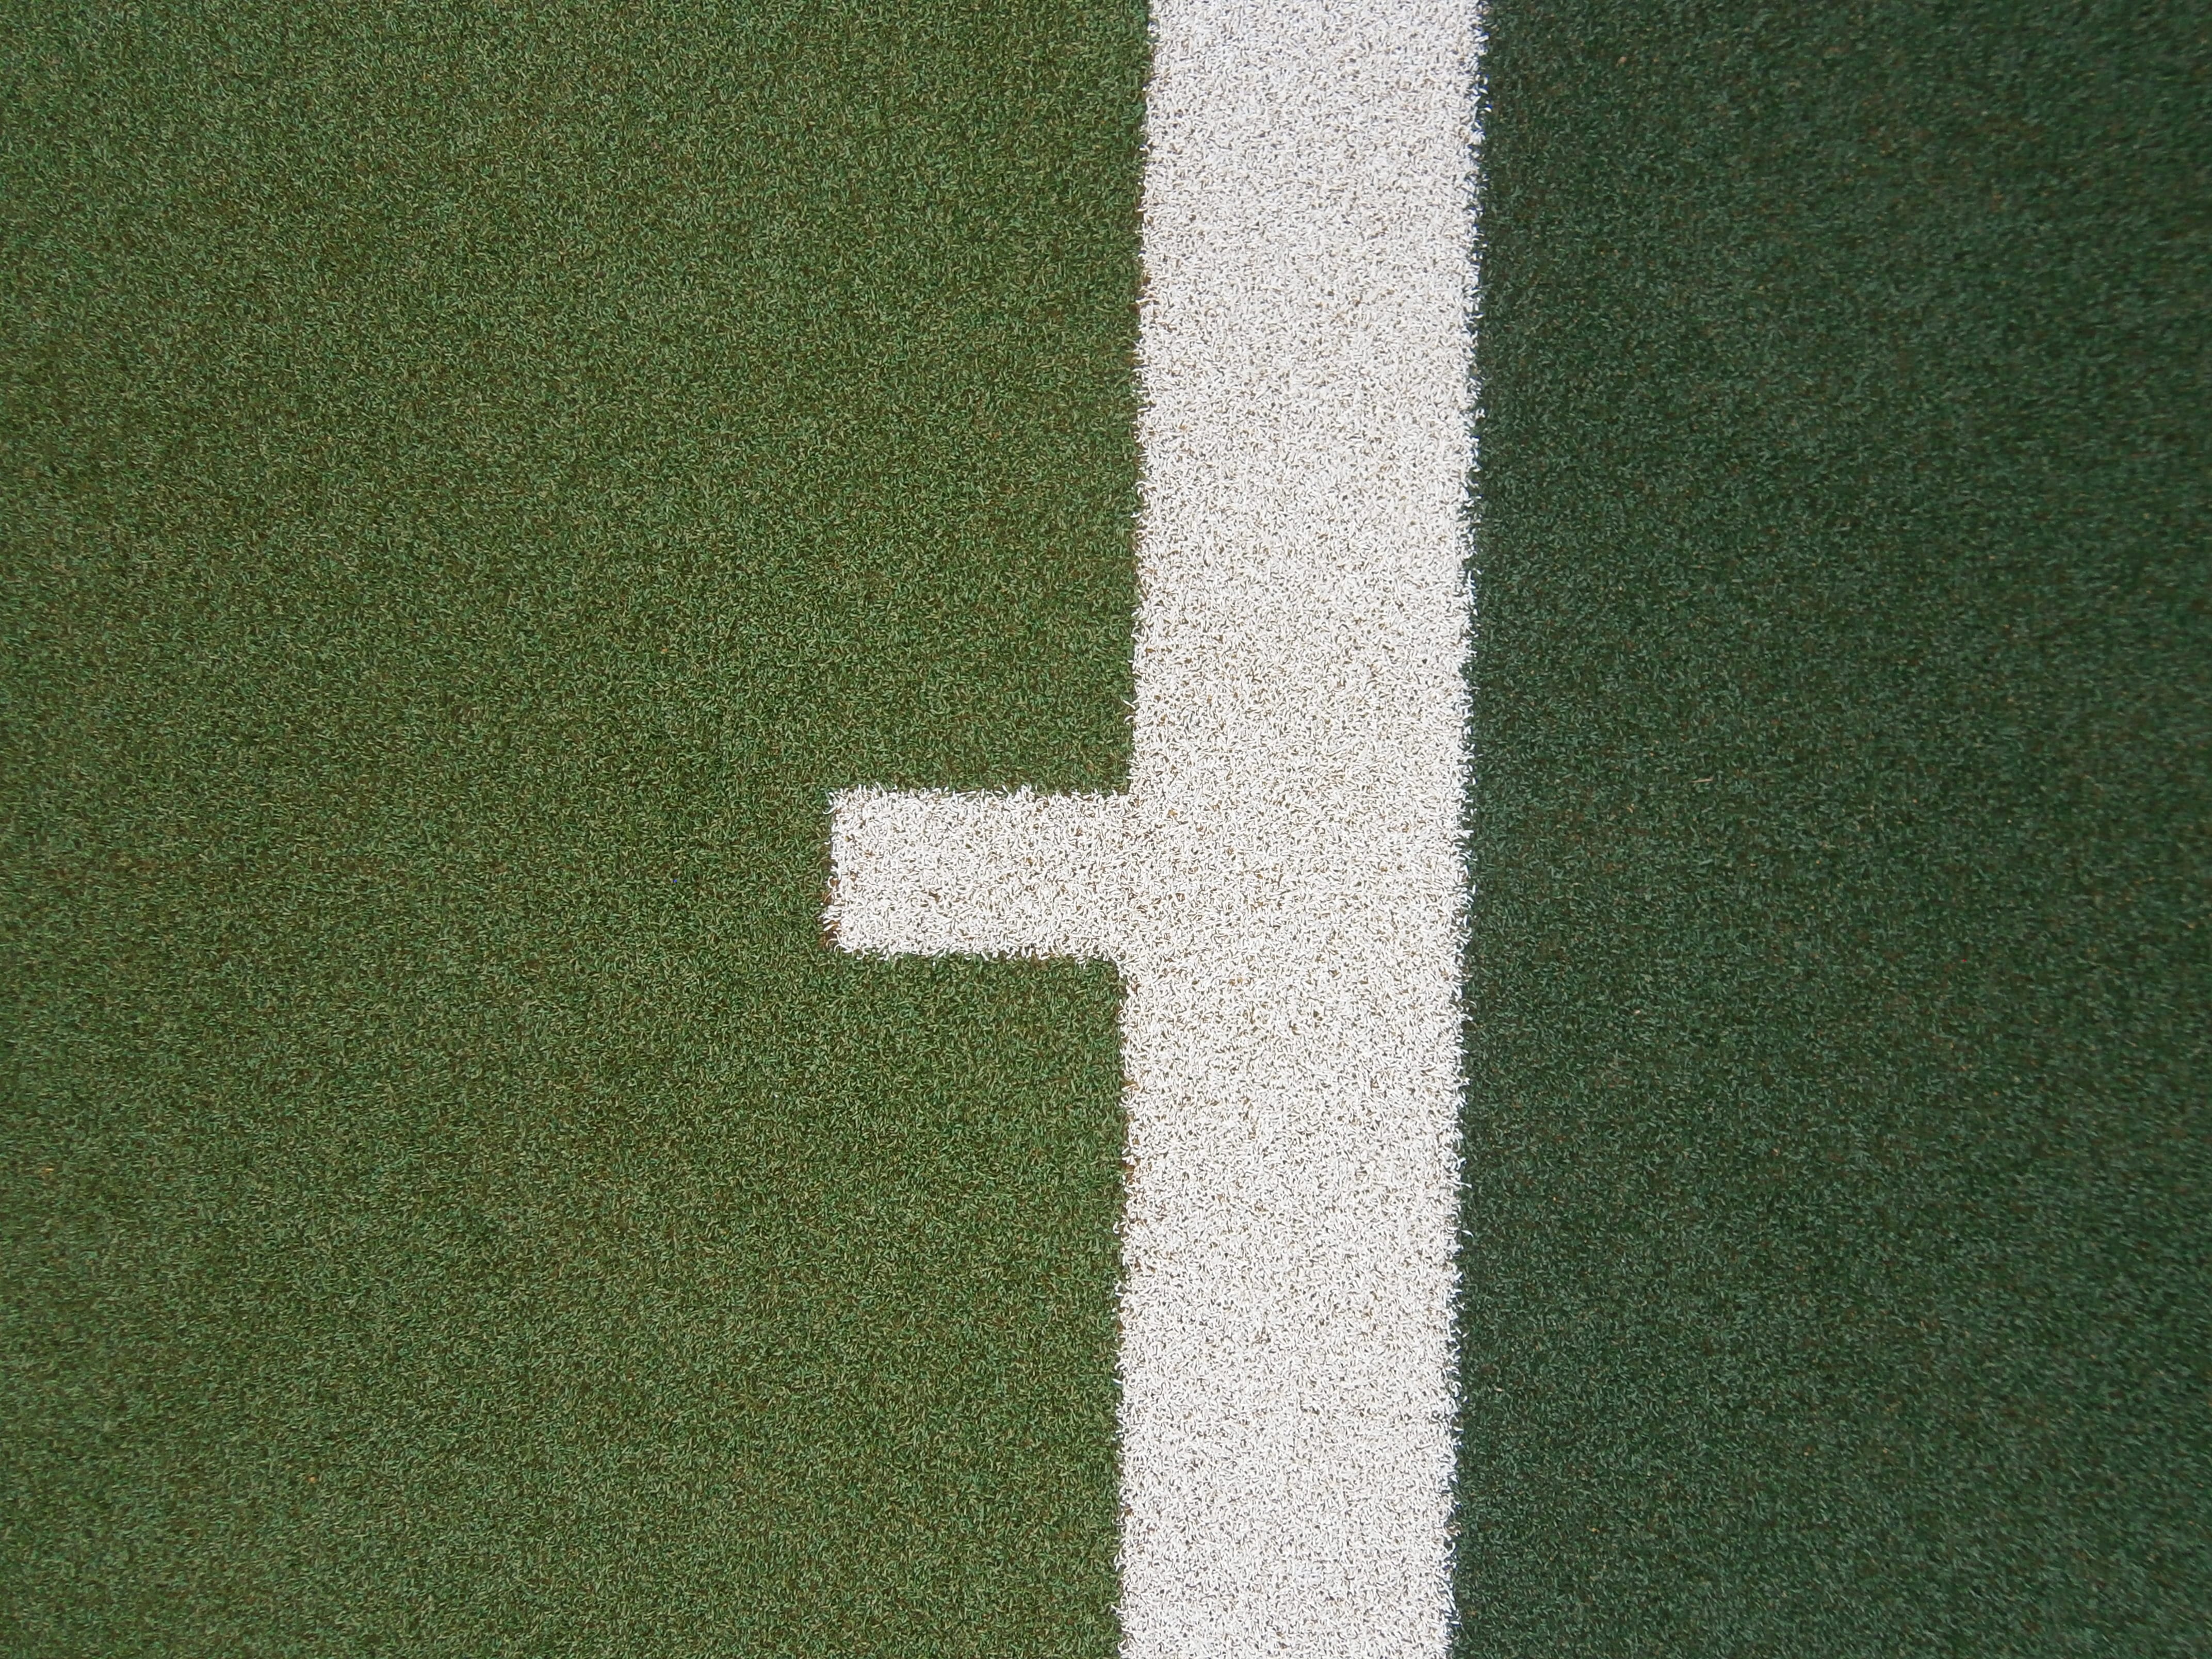 close up view of white line markings on tennis court